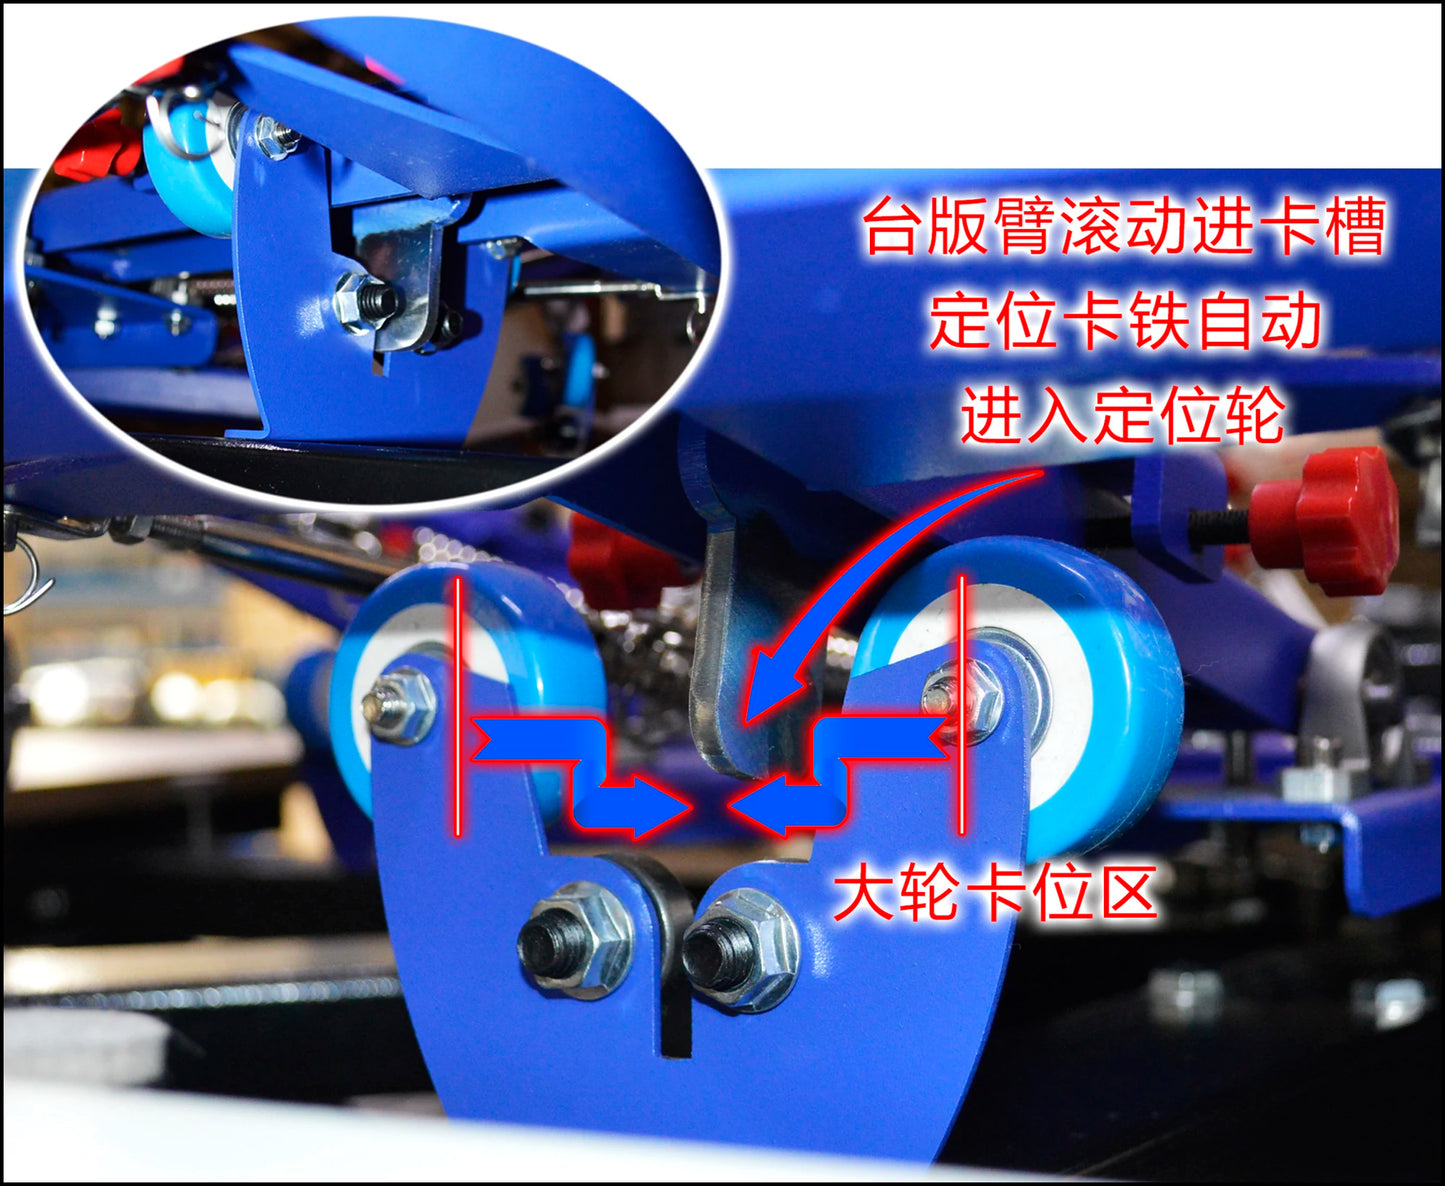 8 Color 8 Station T-shirt Screen Printing Machine High Quality Pressing Machine Comes with Base S882L